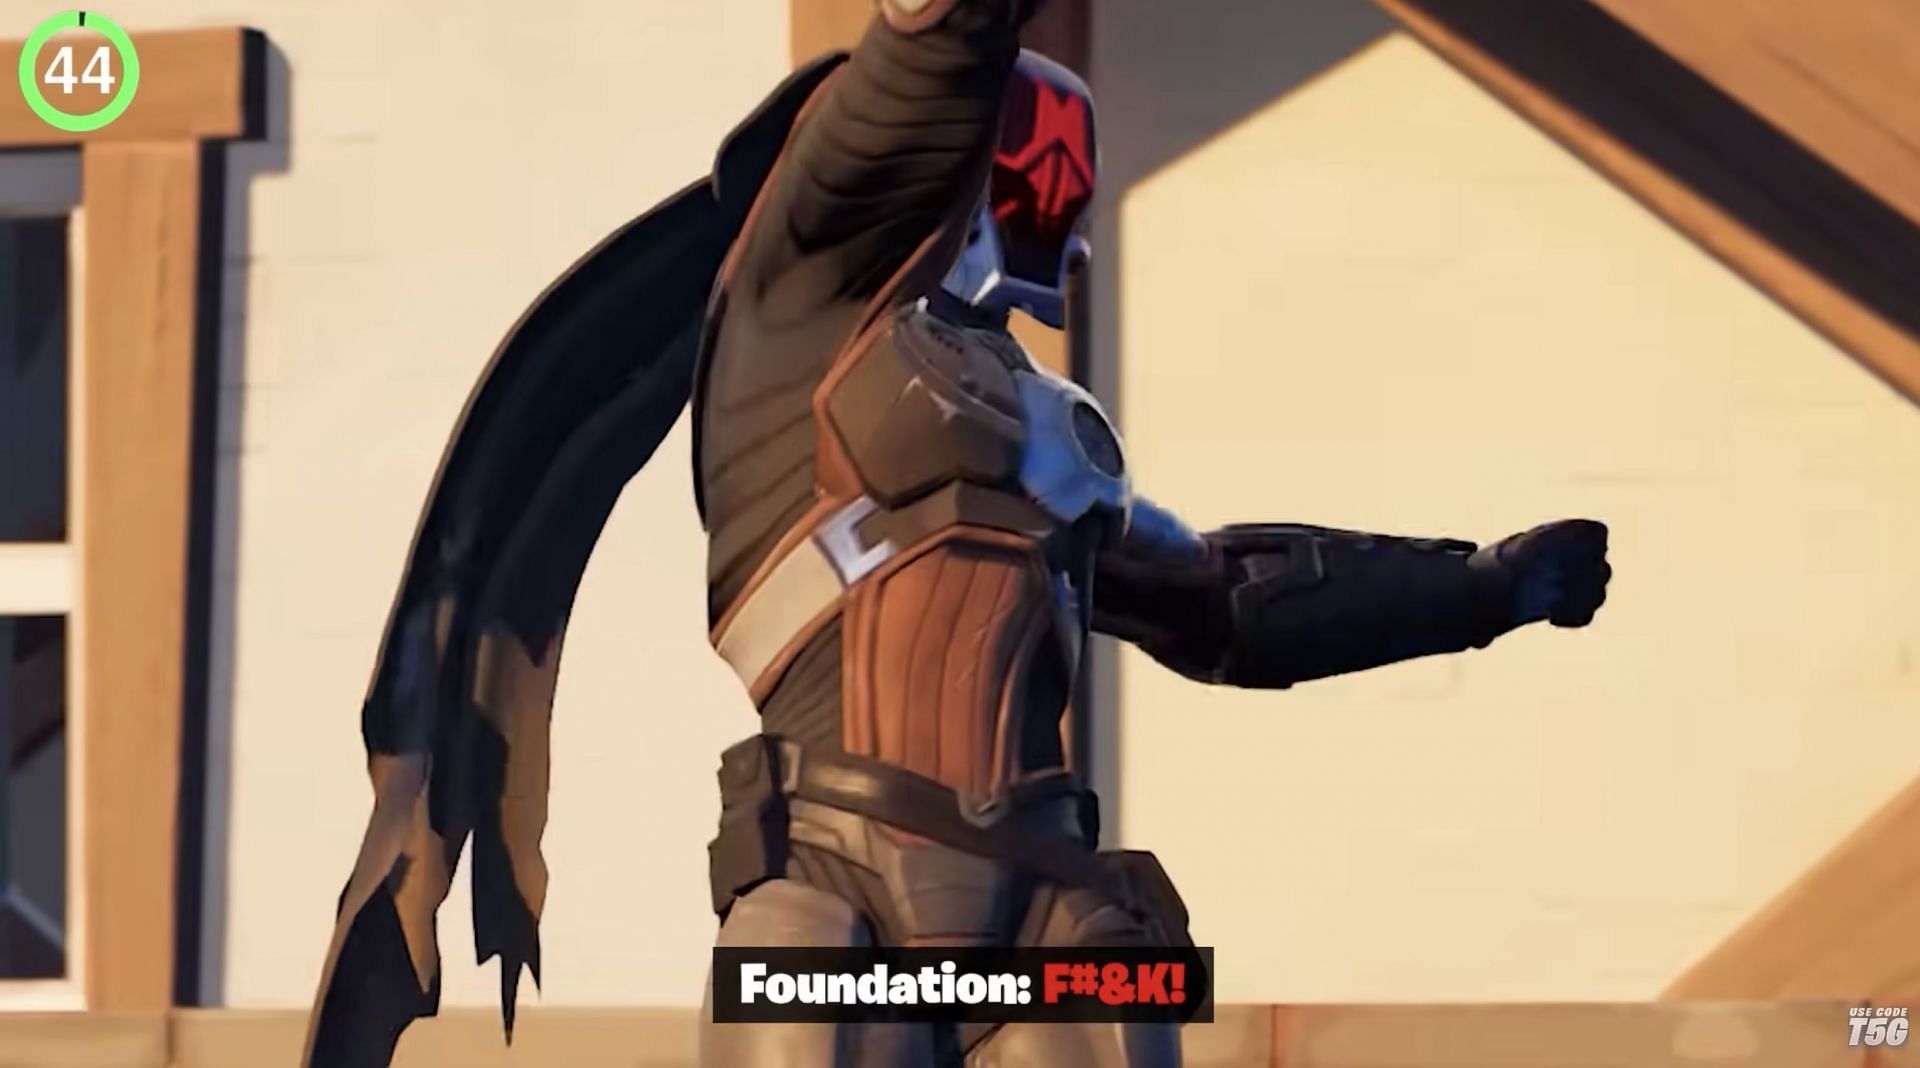 An unused voice line of the Foundation cursing was found (Image via T5G on YouTube)